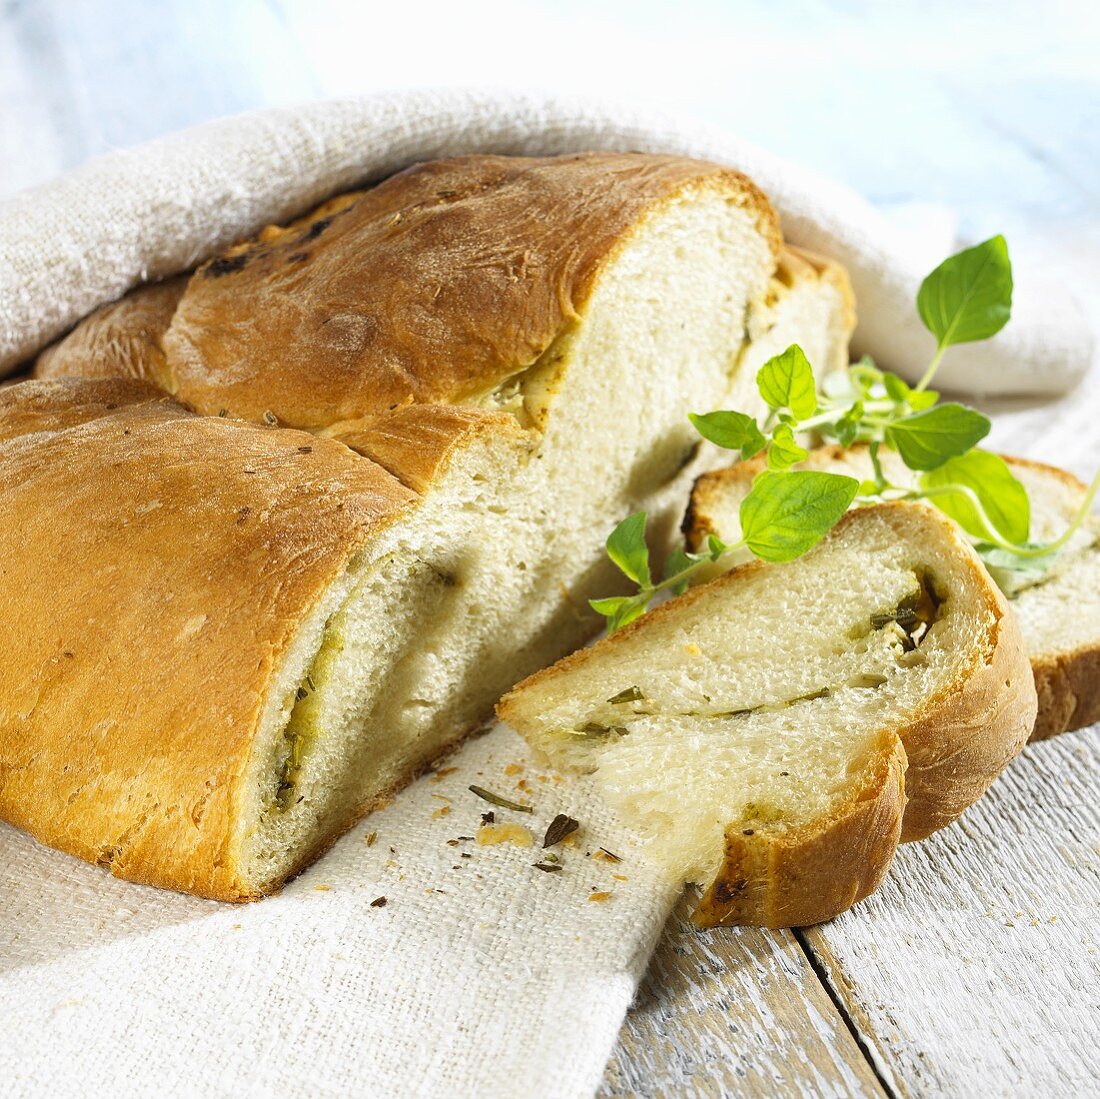 Home-made herb bread